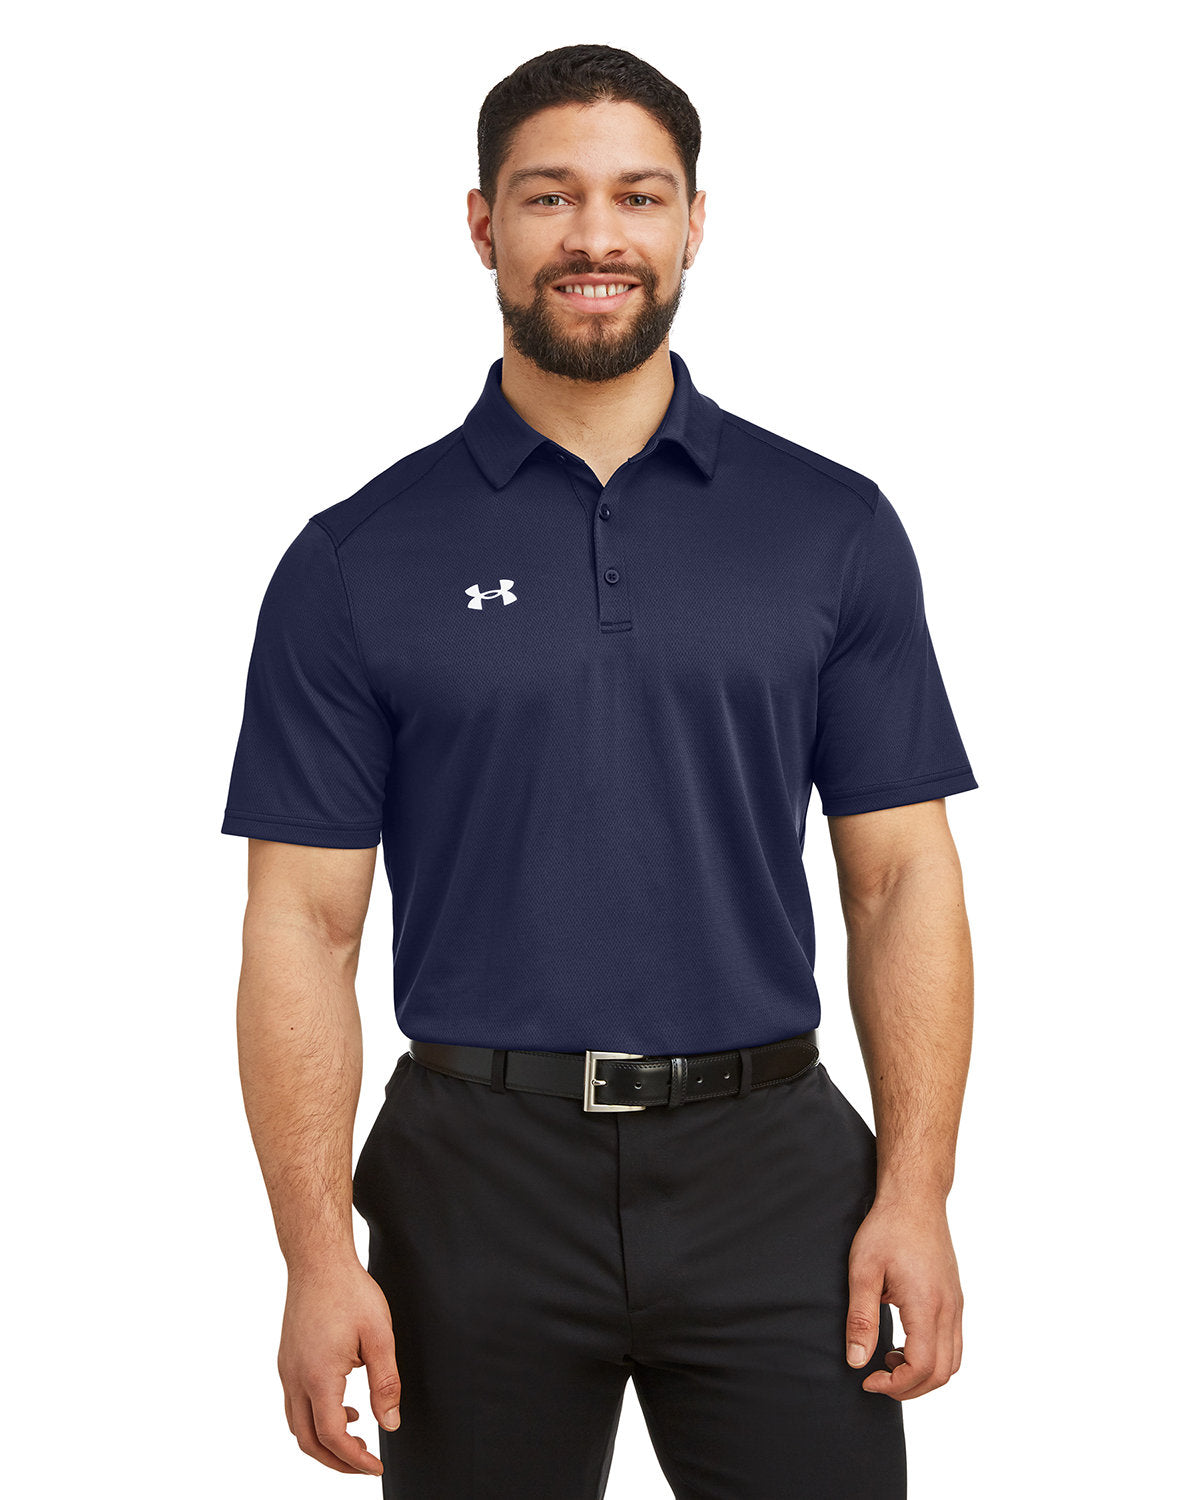 A1) 1370399 Under Armour Men's Tech Polo - CONNECT WORK TOOLS